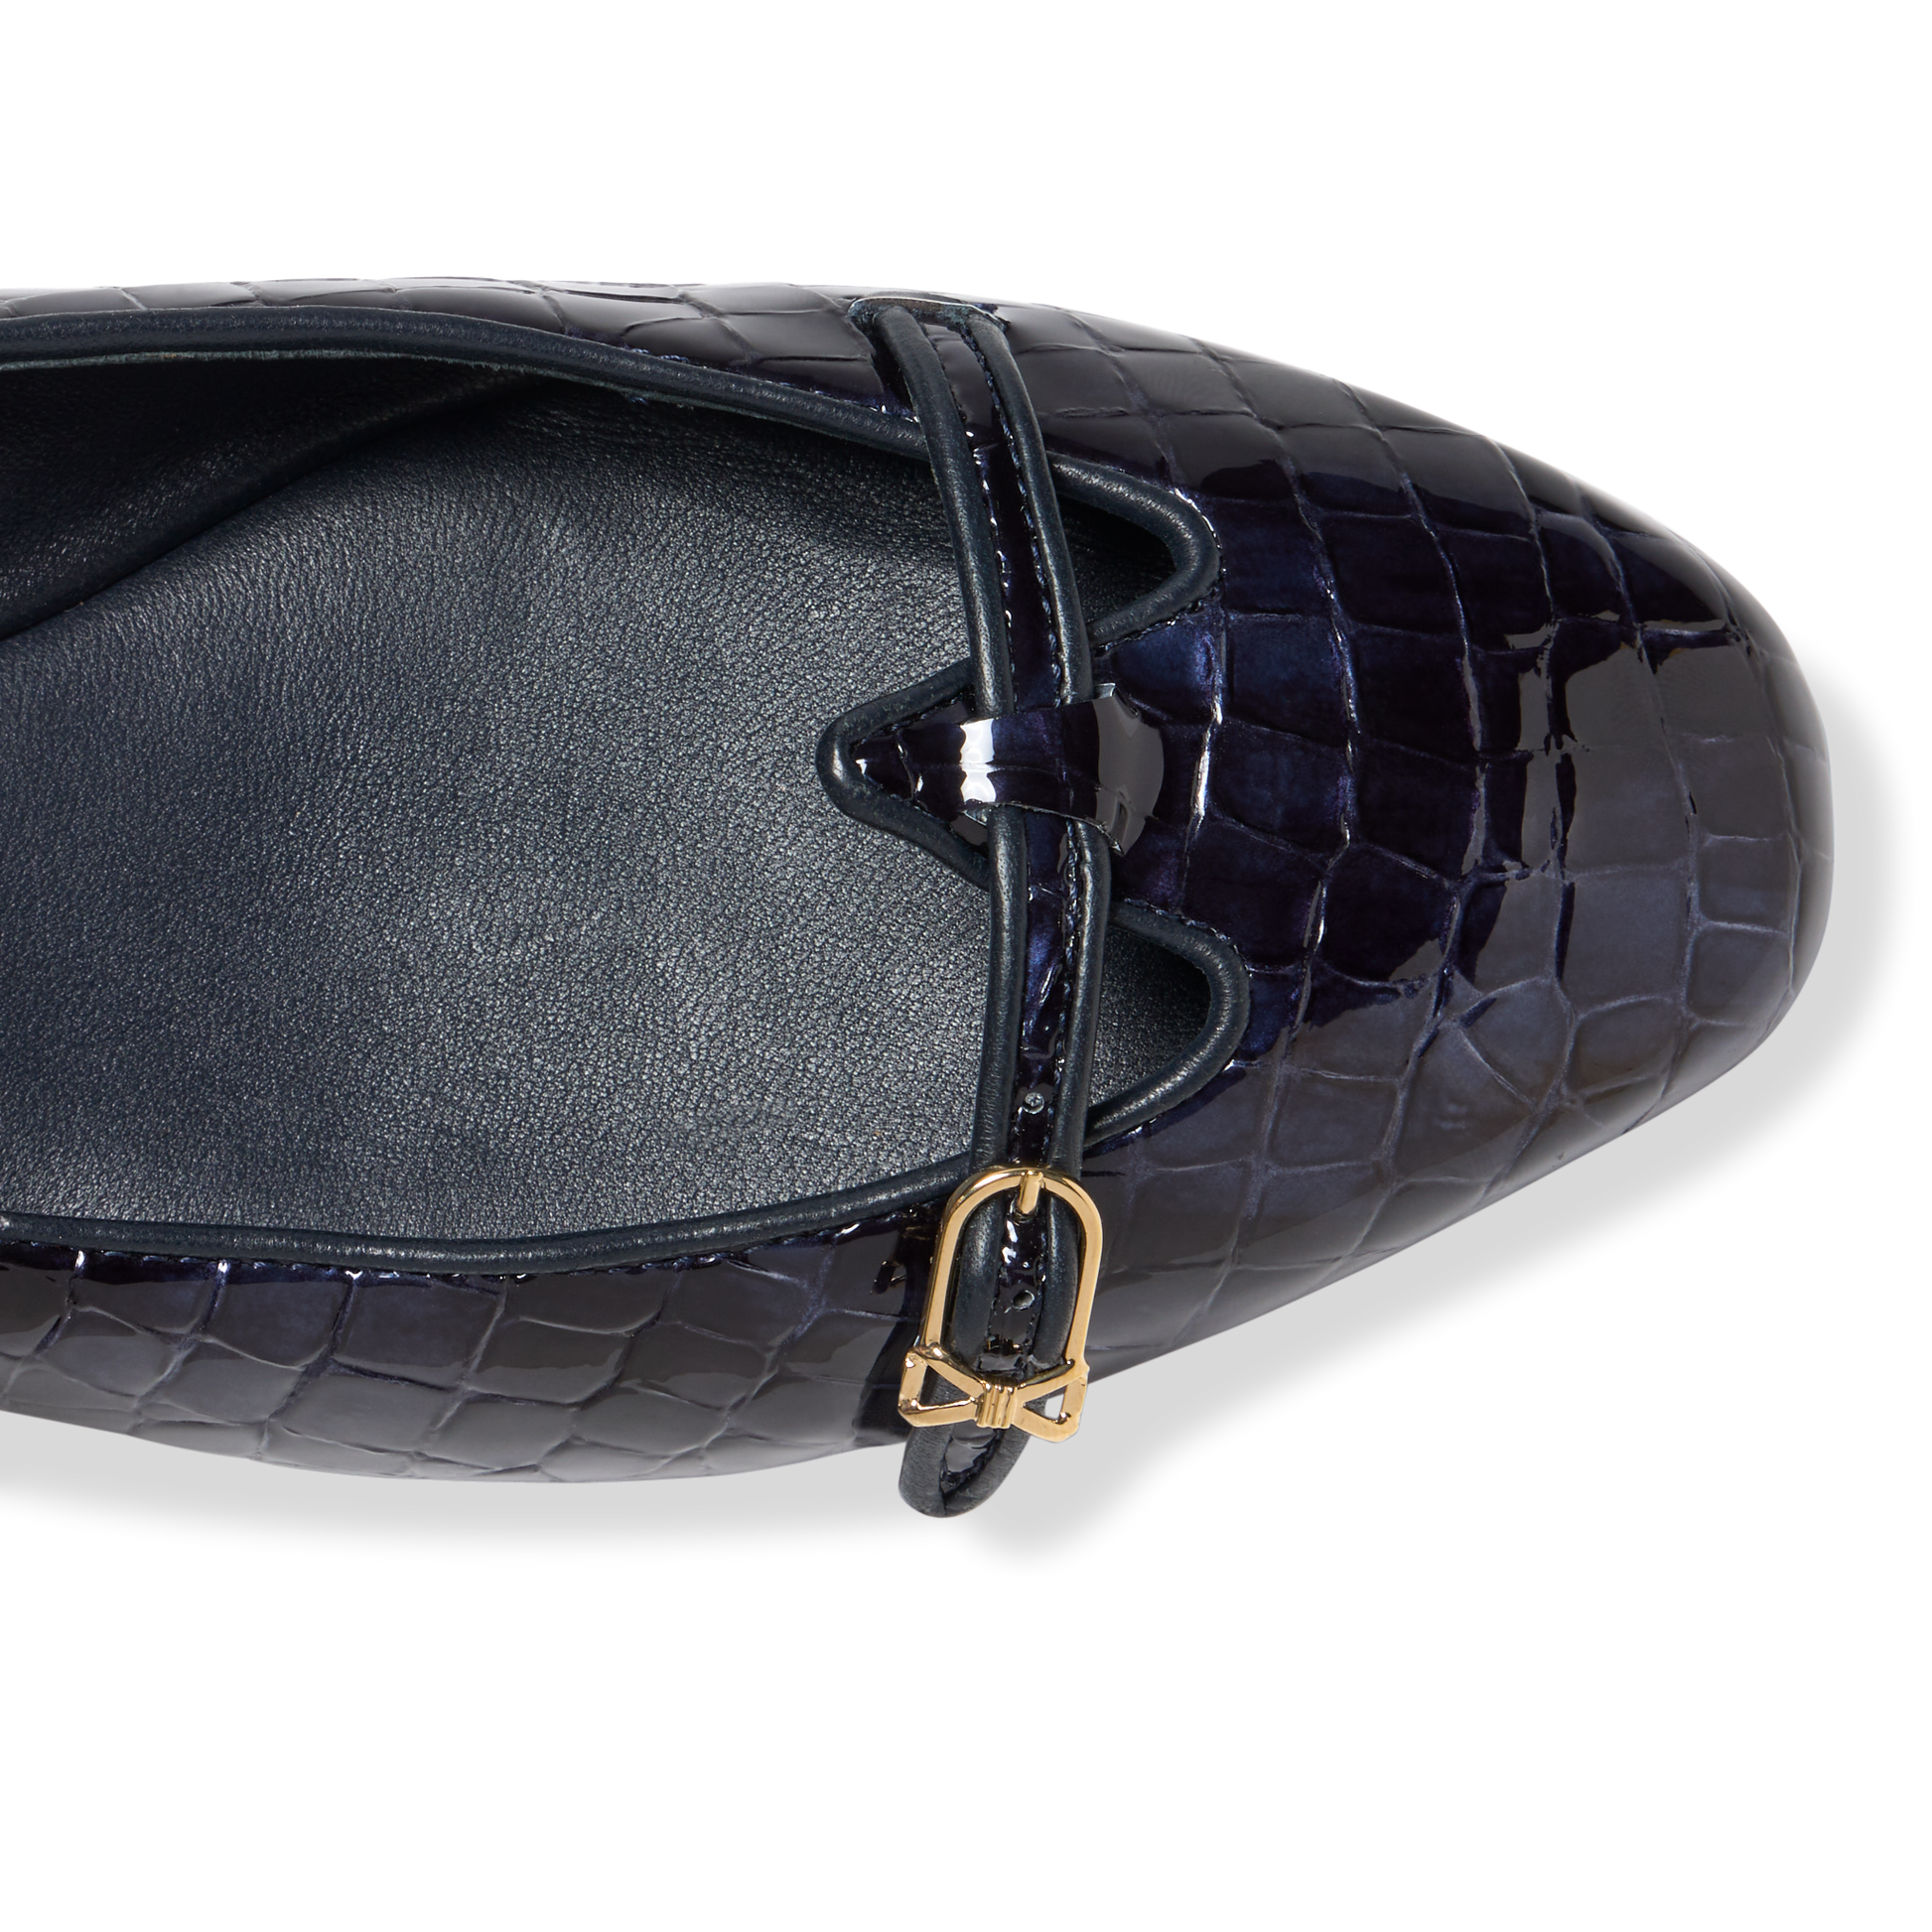 Mary Gail Mary Jane in Navy Croc Embossed Patent